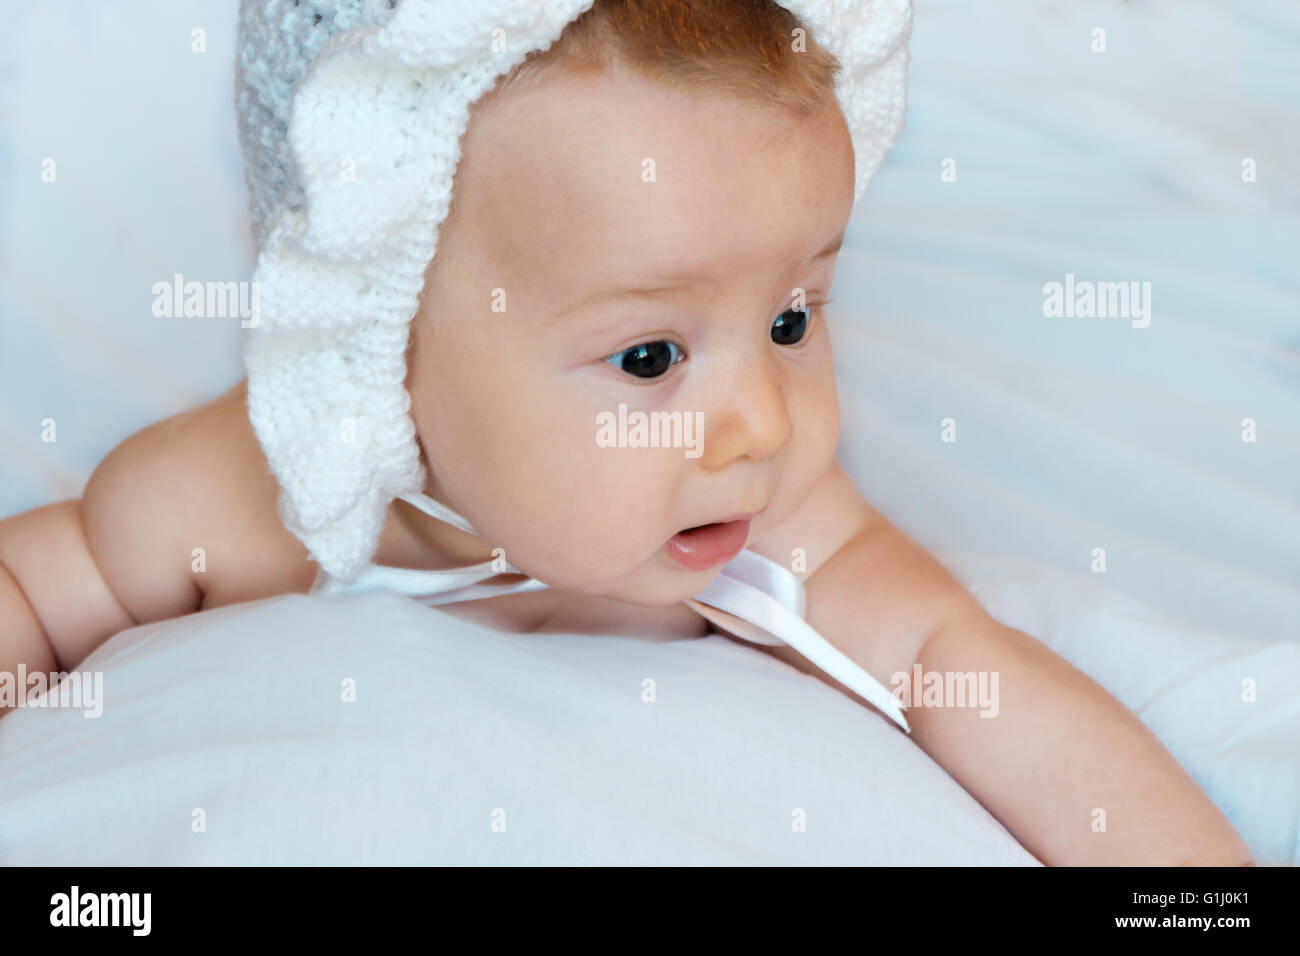 innocent baby on a white background Stock Photo